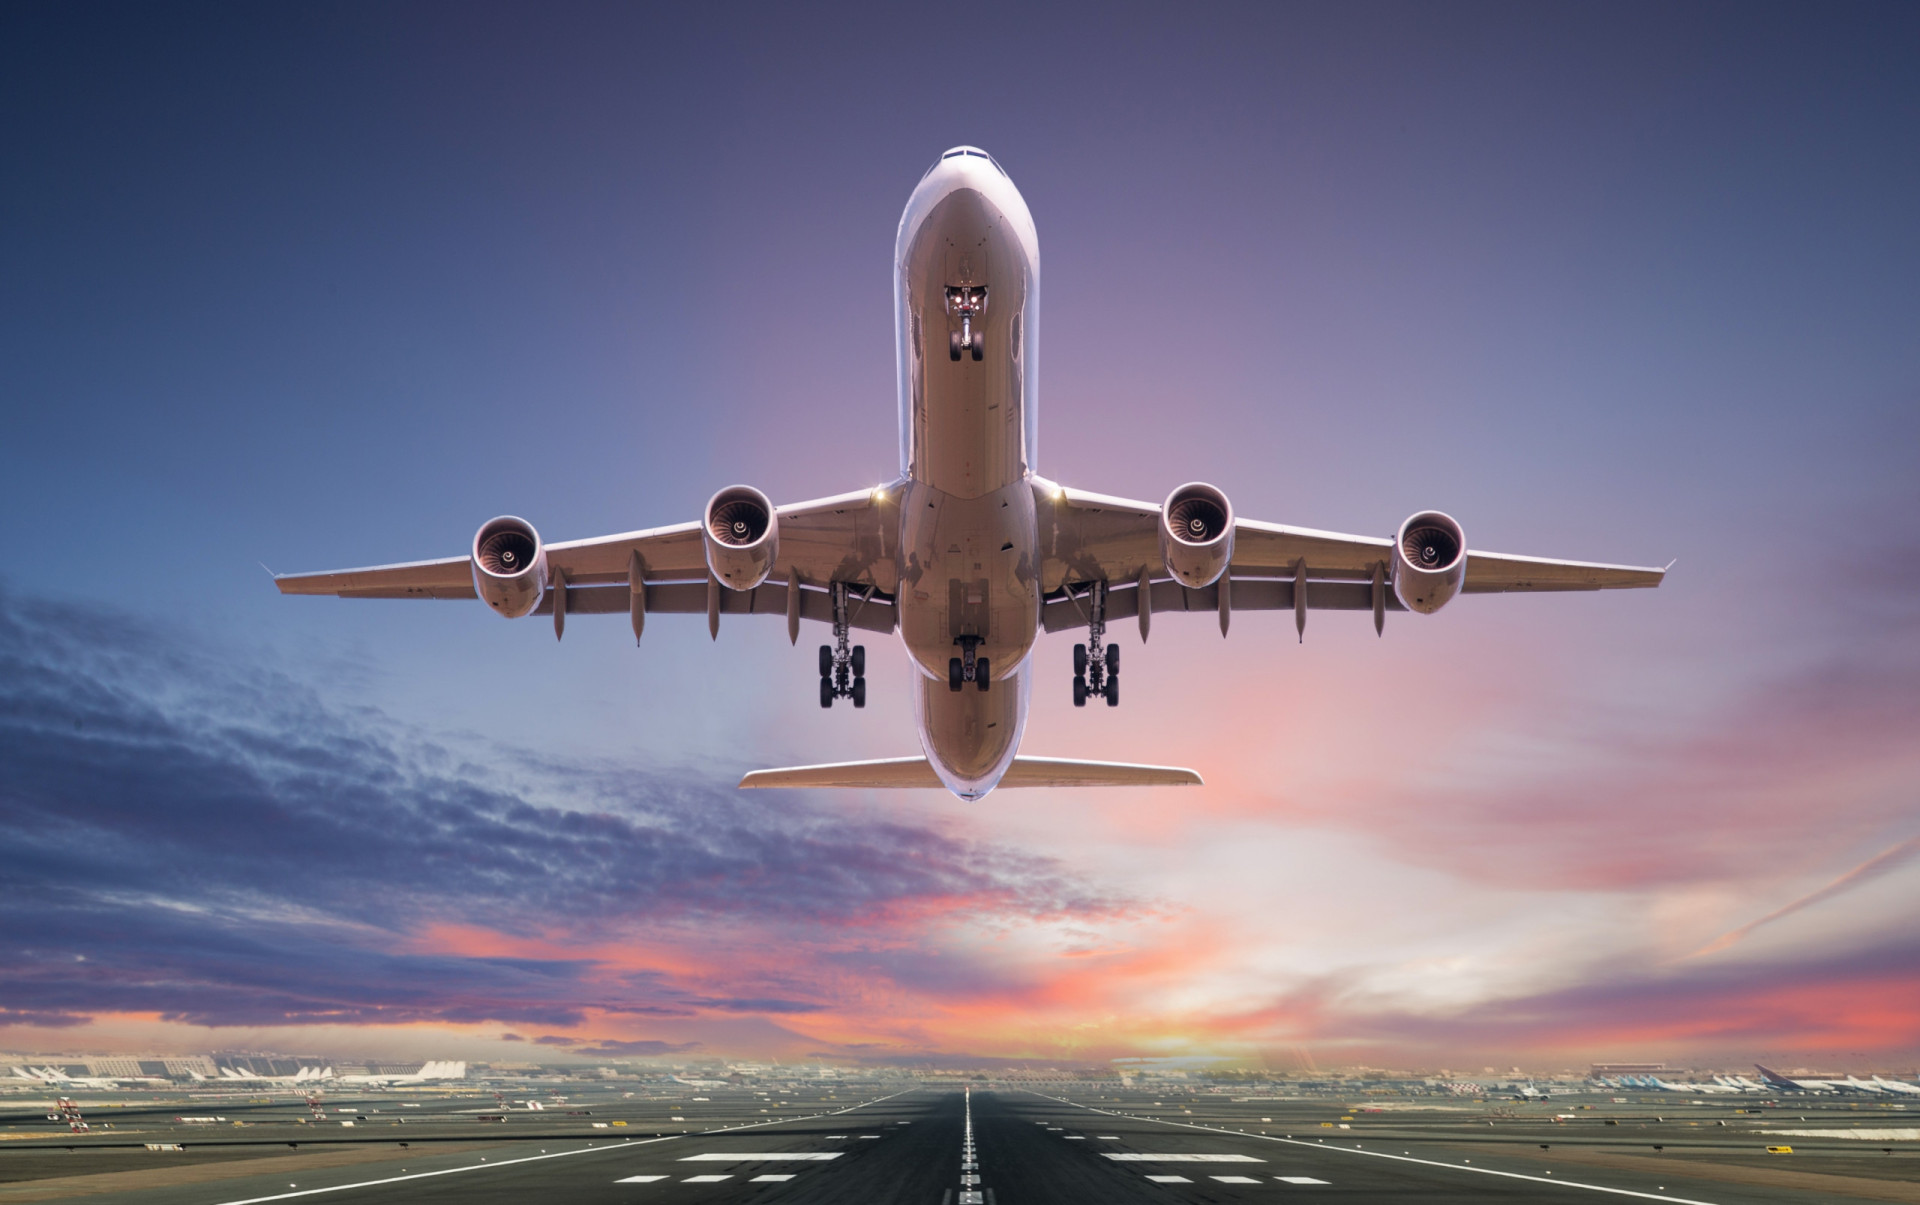 <p>For example, are airfares included in the package? Is it a direct flight, or is there an onward connection that you'll be expected to pay for?</p><p><a href="https://www.msn.com/en-us/community/channel/vid-7xx8mnucu55yw63we9va2gwr7uihbxwc68fxqp25x6tg4ftibpra?cvid=94631541bc0f4f89bfd59158d696ad7e">Follow us and access great exclusive content every day</a></p>